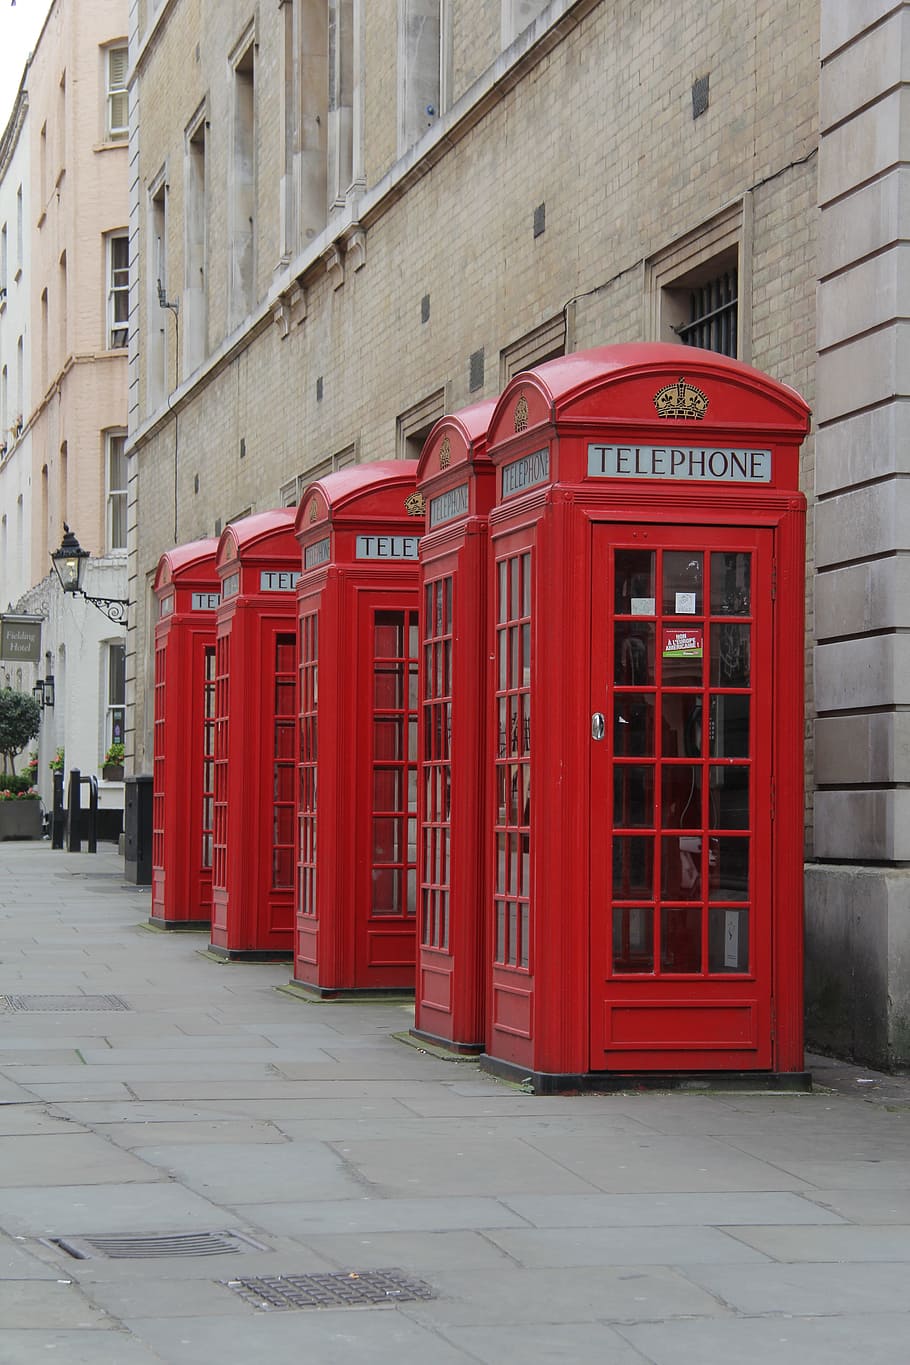 several telephone booths, red phone box, london, telephone, telephone box, united kingdom, england, building exterior, architecture, red